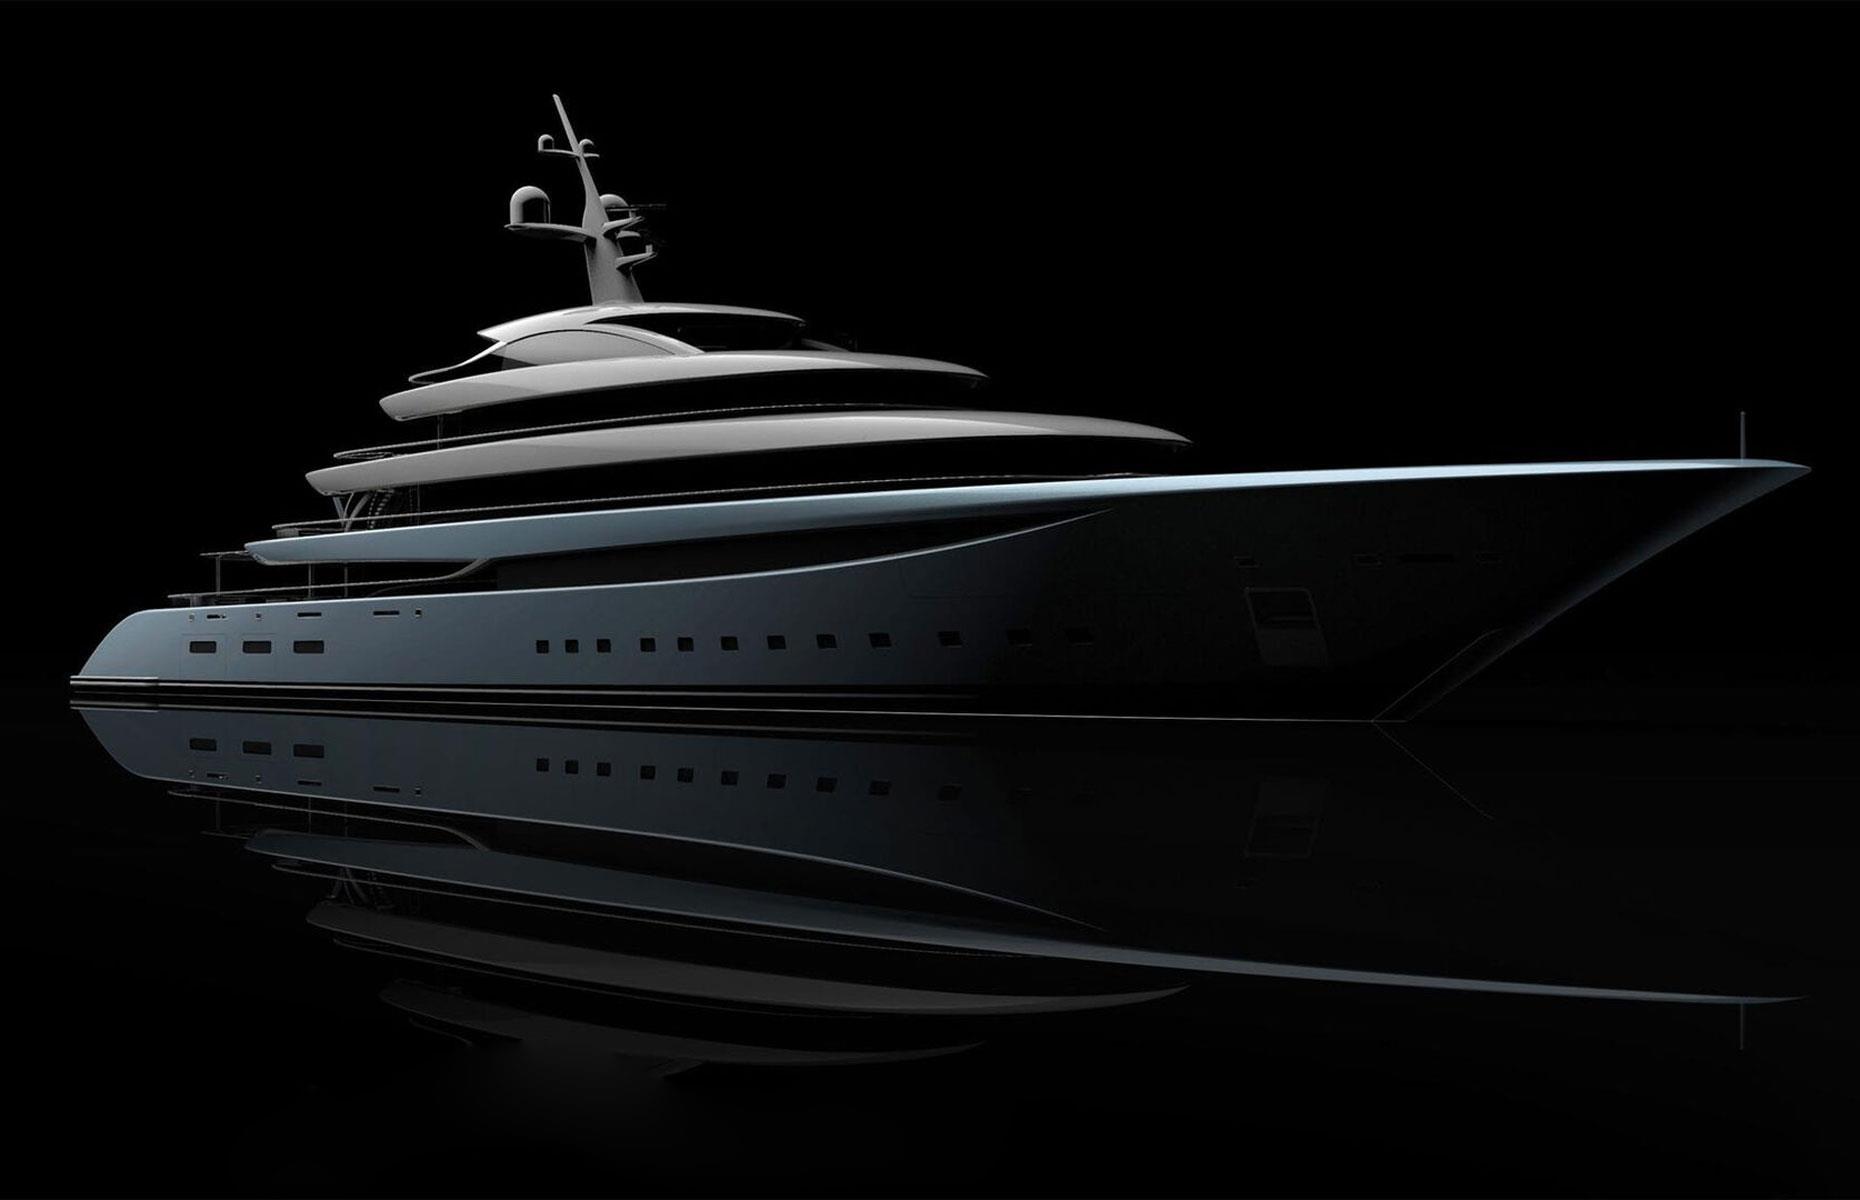 <p>Spanning 338 feet, <em>Project JASSJ</em> is the third-largest of the show-stopping superyachts German shipbuilder Lürssen is delivering in 2024.</p>  <p>Sold in 2021 to an anonymous buyer for an undisclosed price, the superyacht features exterior and interior design by RWD Design. American firm Moran Yacht & Ship is overseeing the build.</p>